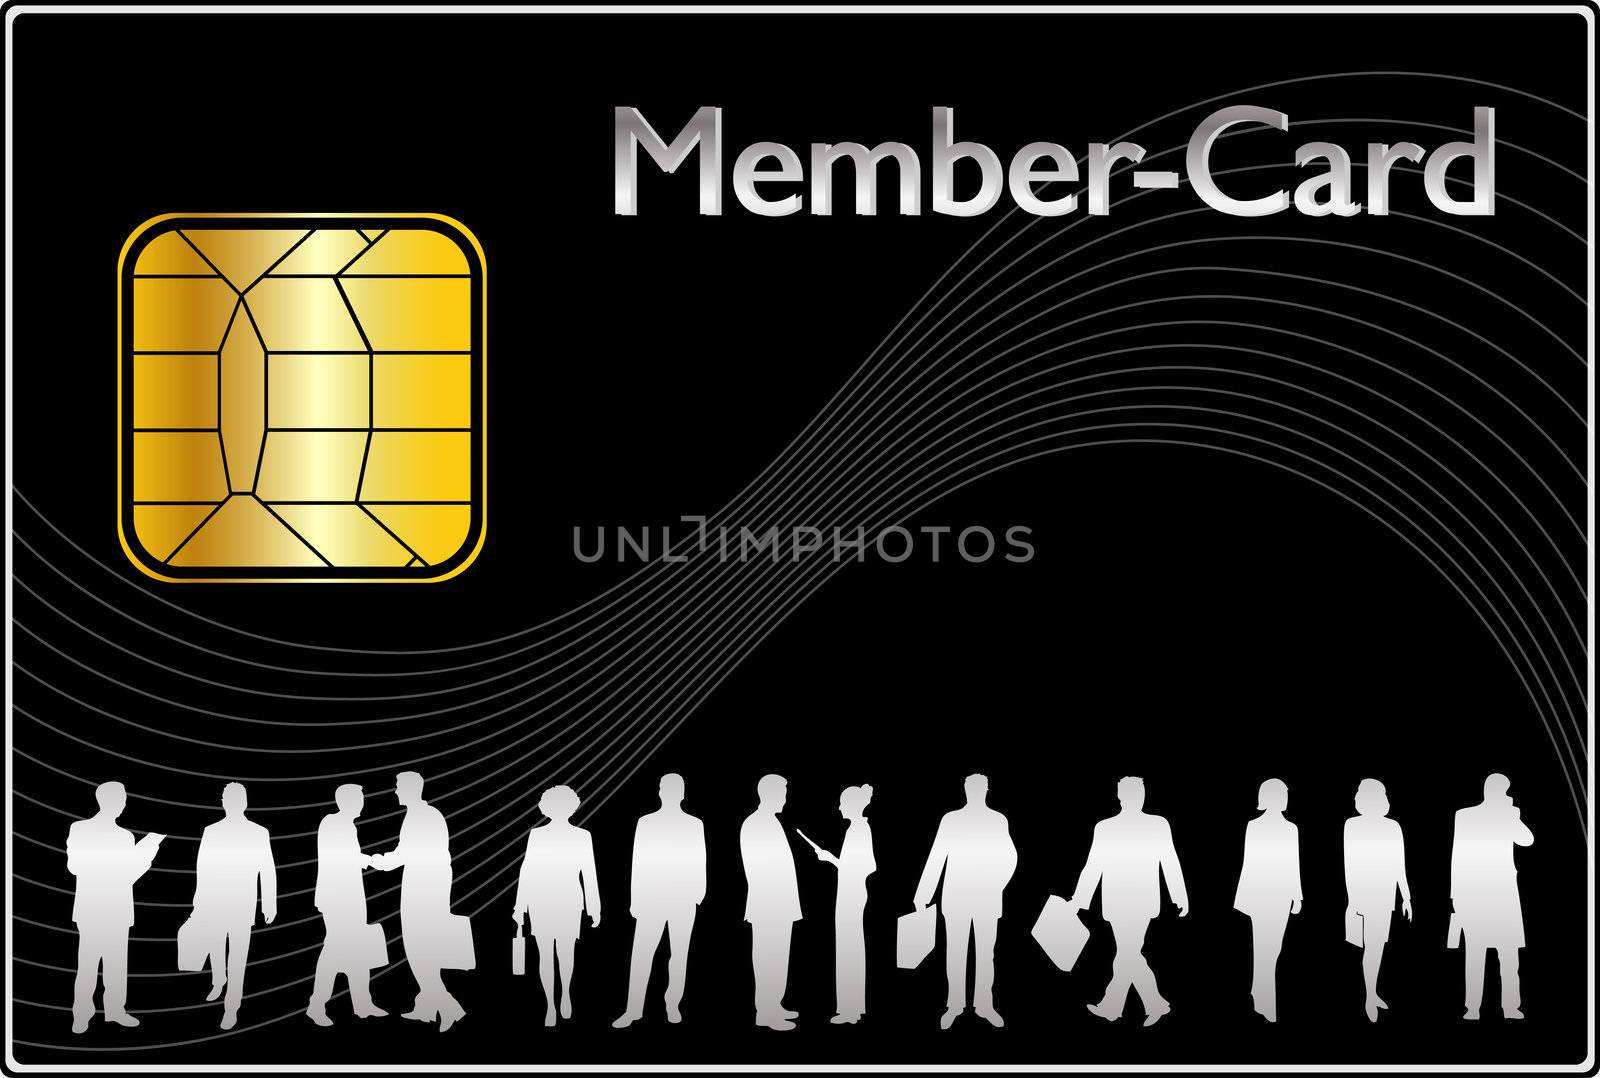 Member Card by peromarketing